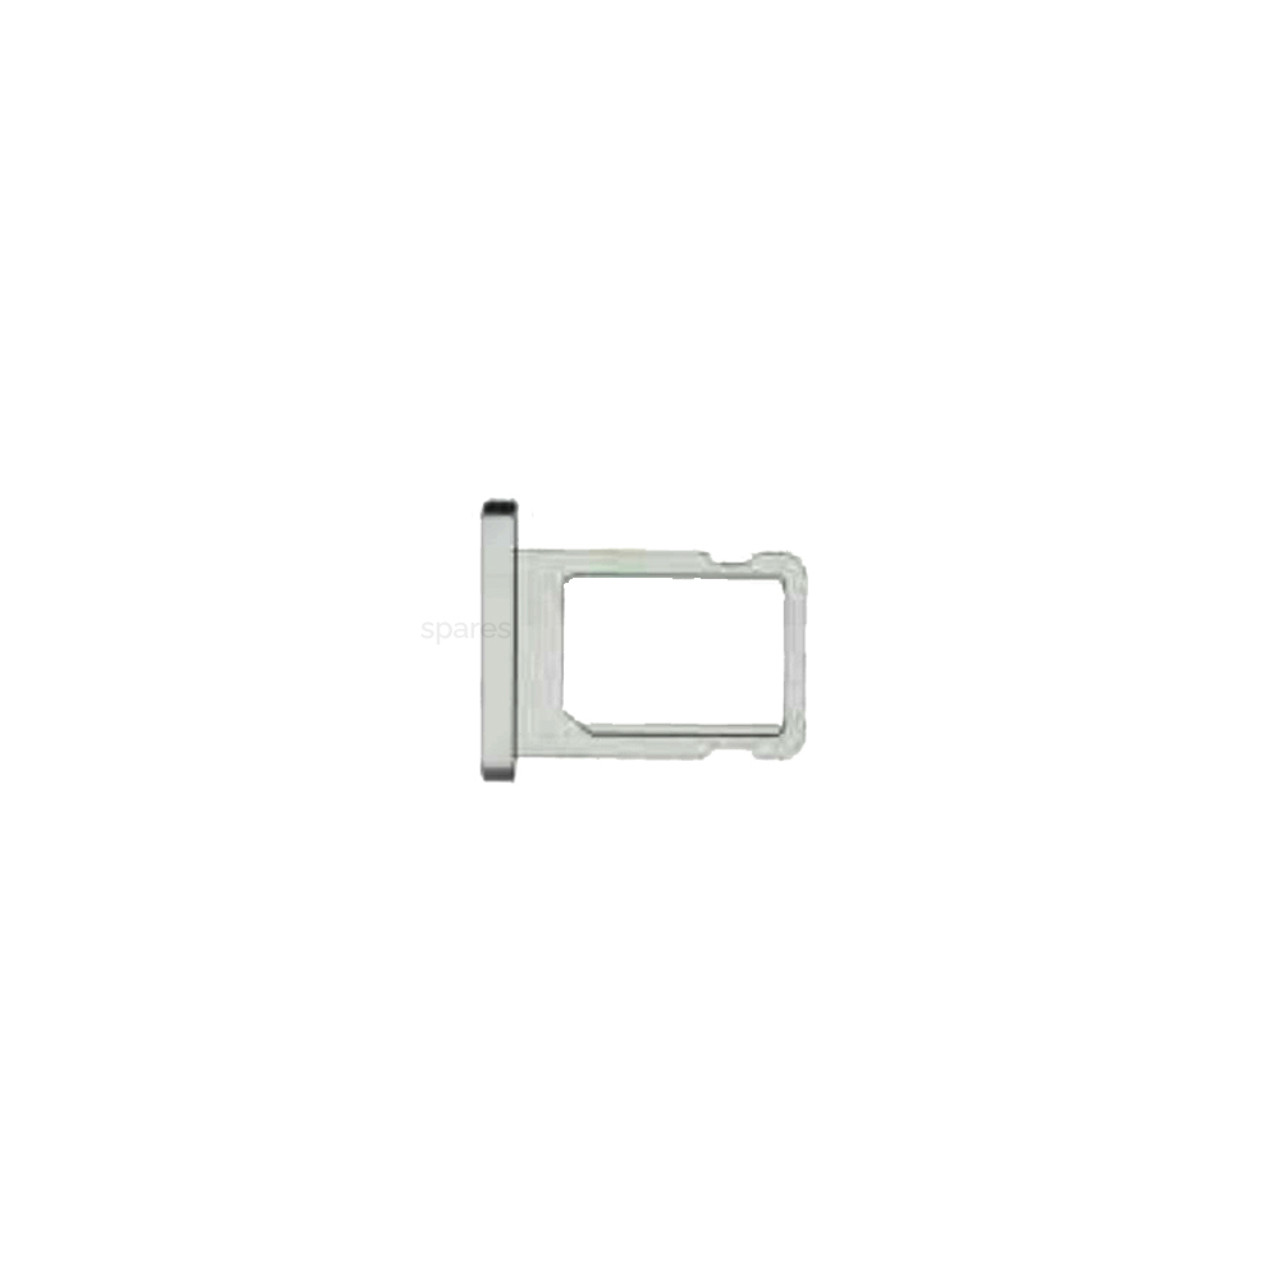 iPad Pro 9.7-inch - Sim Tray Replacement - Silver